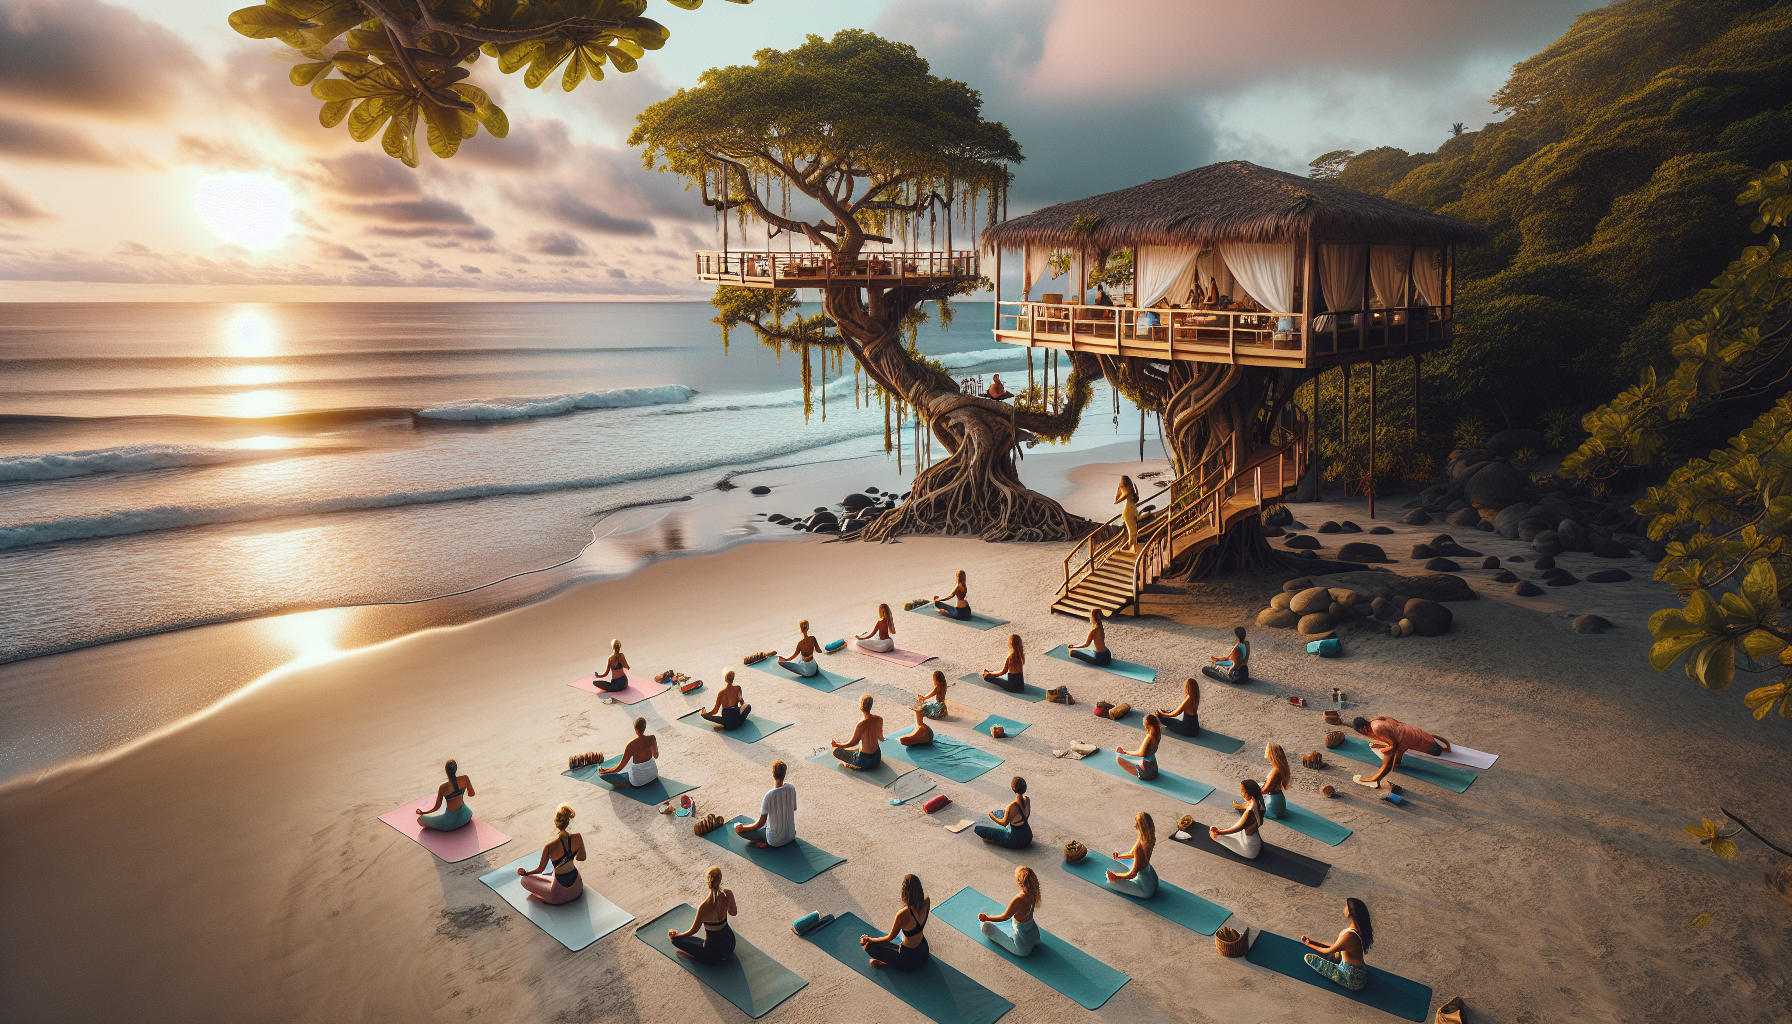 What Are The Options For Yoga Or Wellness Retreats On Nicaraguan Beaches?